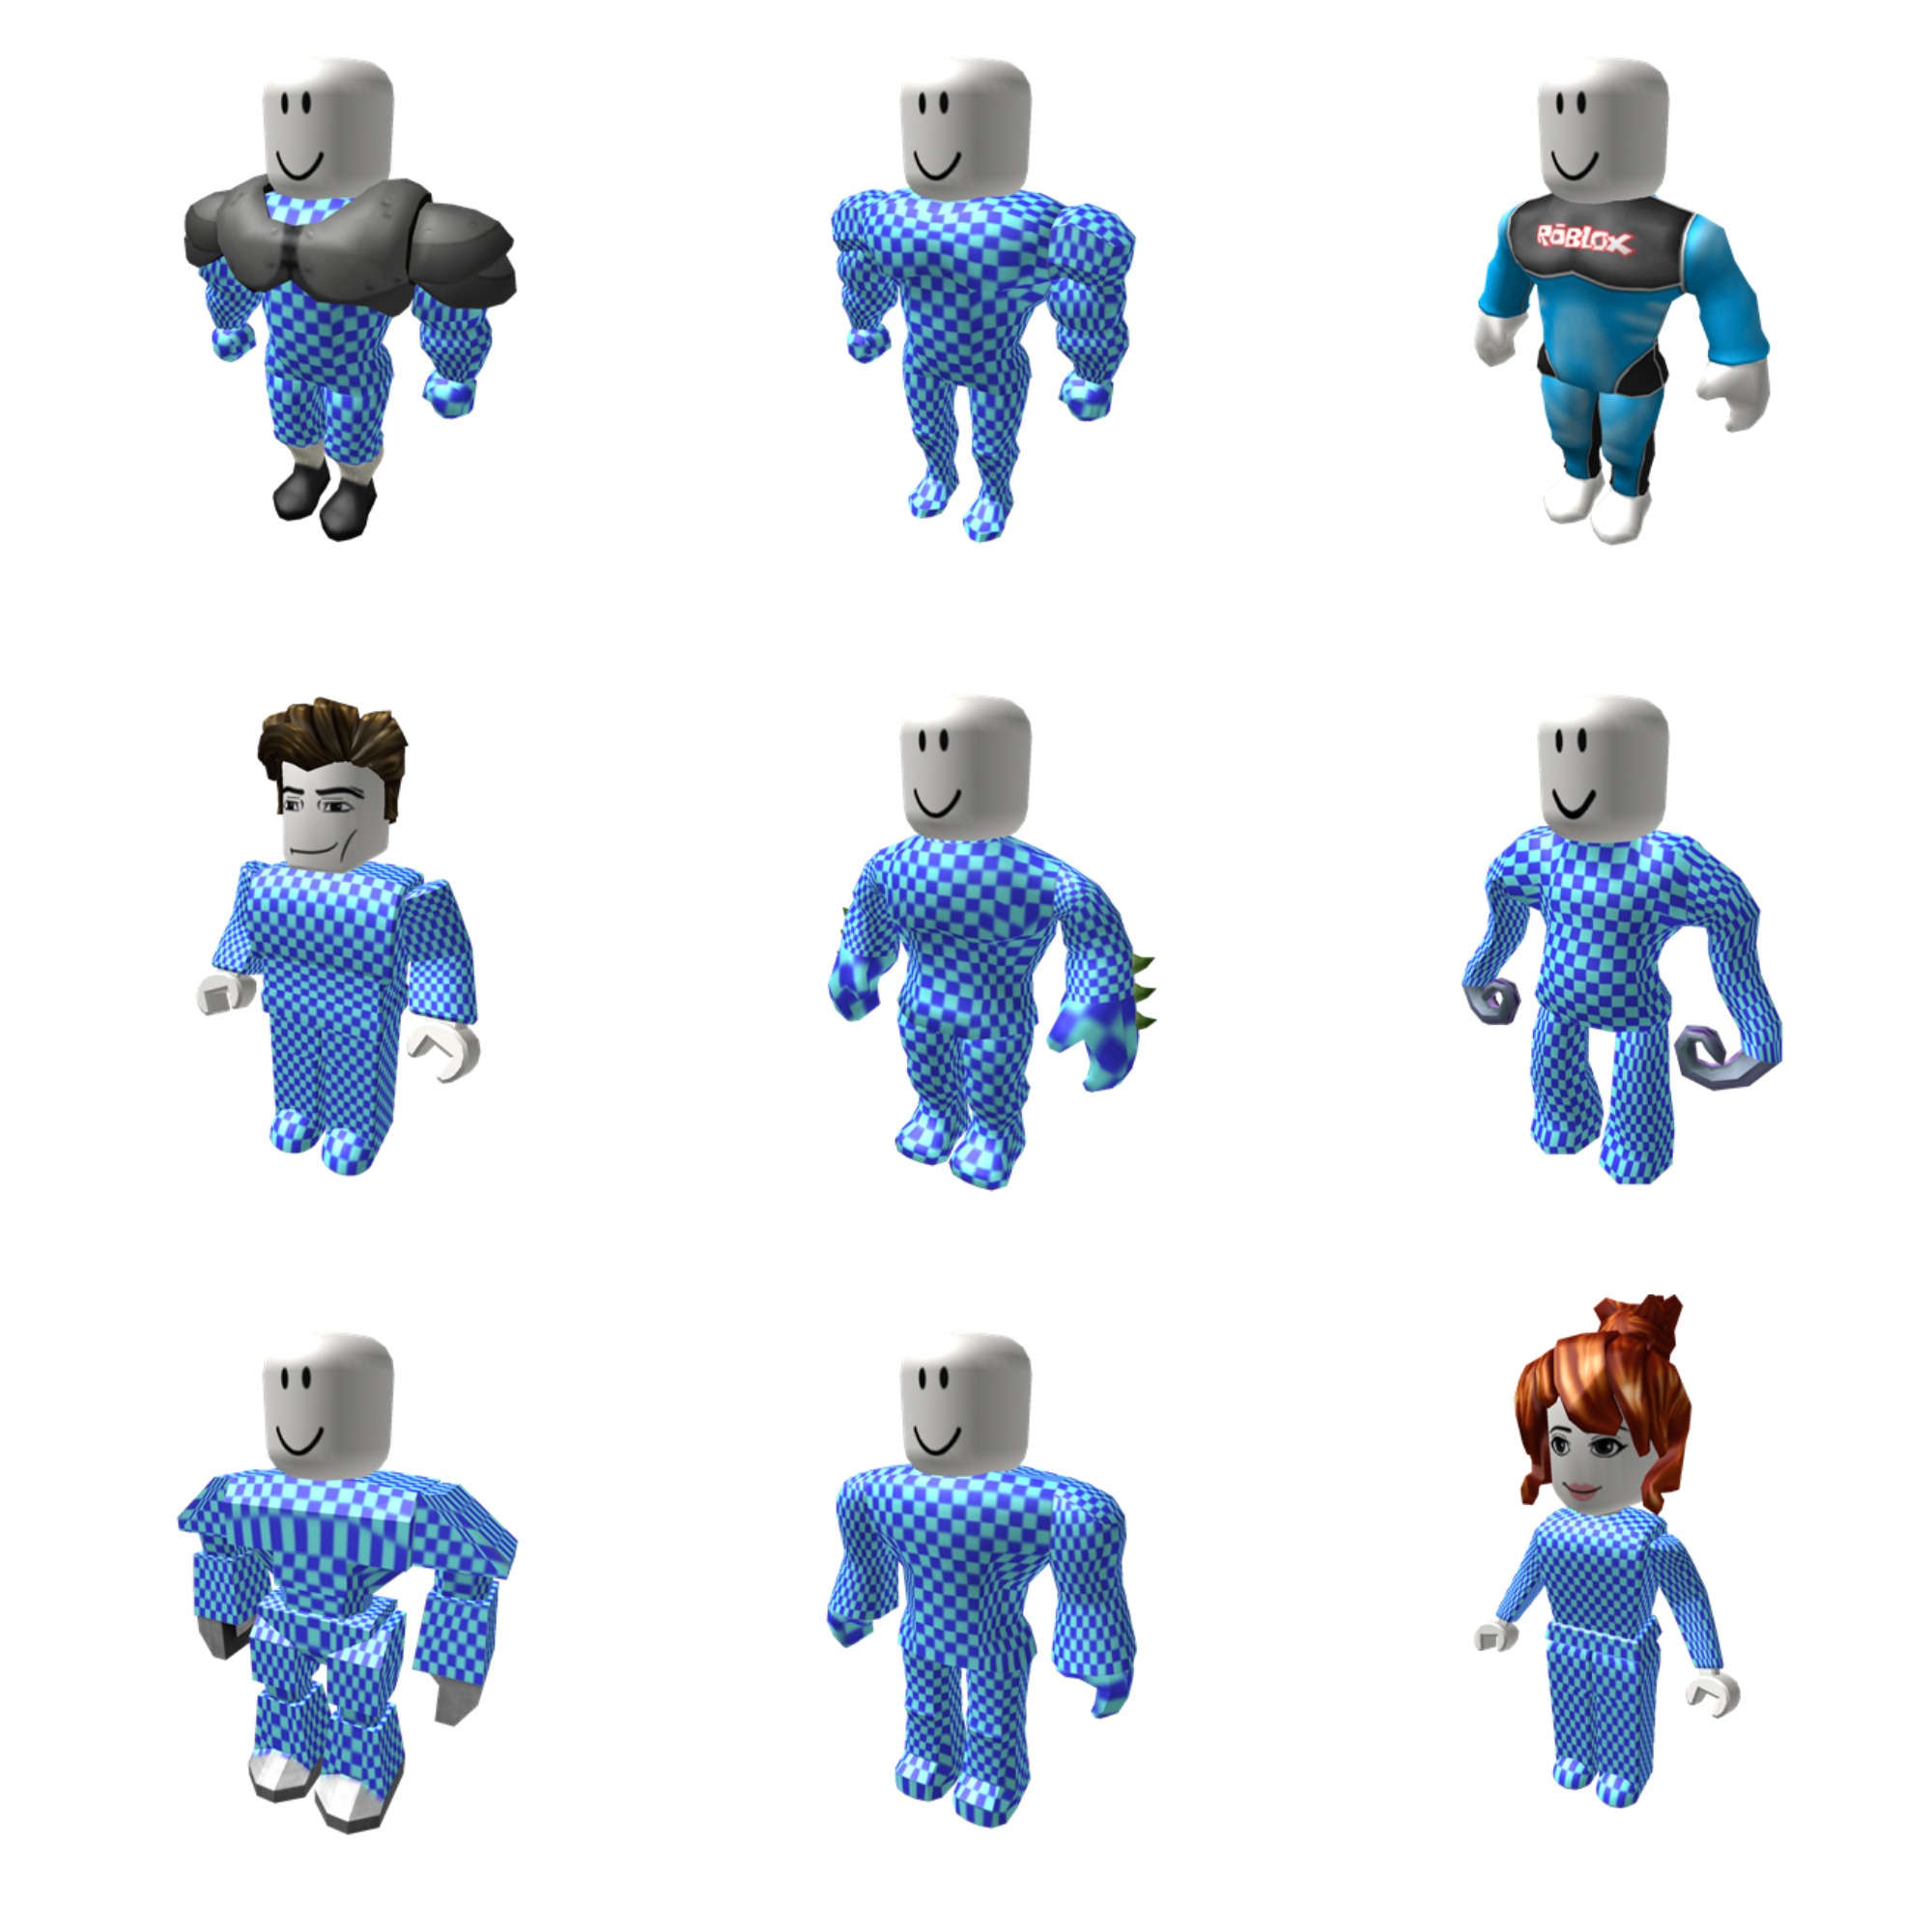 Here the complete cycle of roblox body Evolution